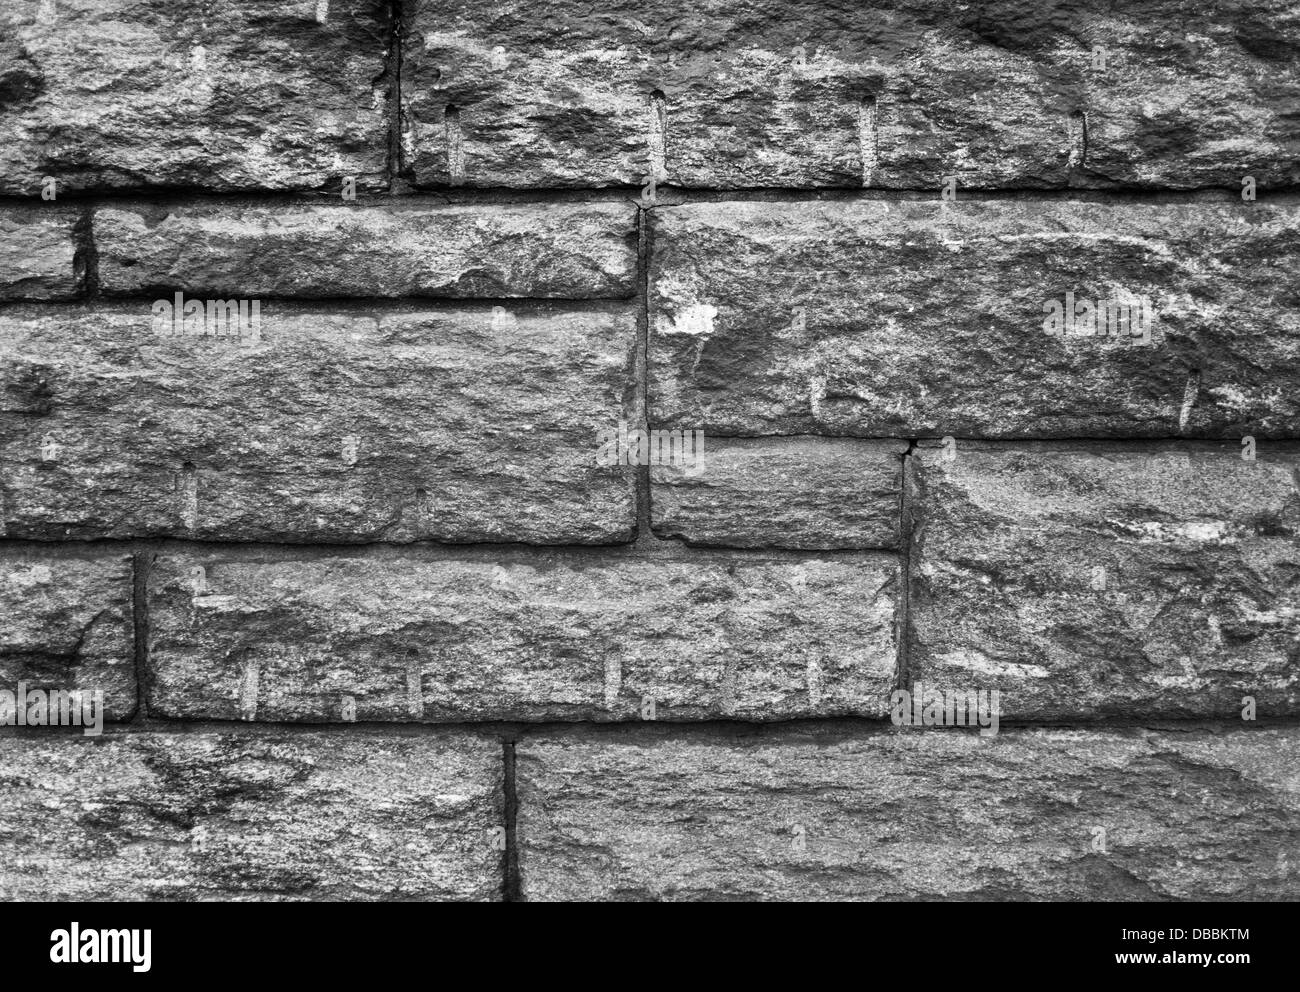 Texture of stone brick wall in black and white. Stock Photo